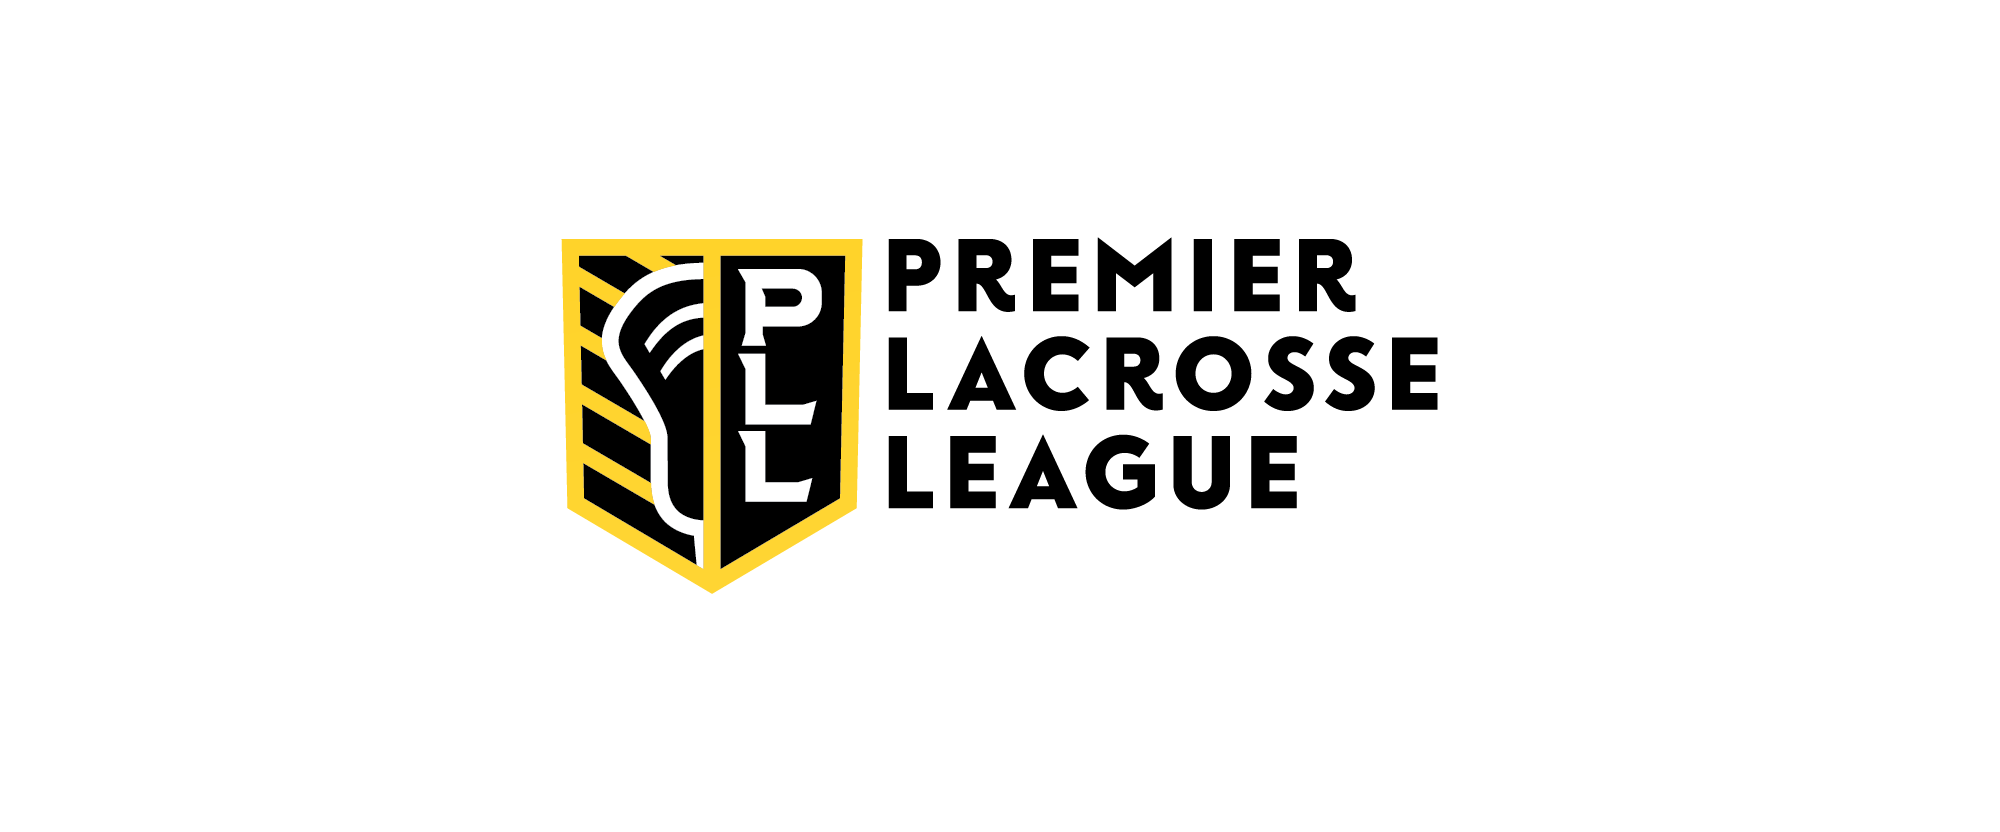 Lacrosse Logo - Brand New: New Logo and Identity for Premiere Lacrosse League and